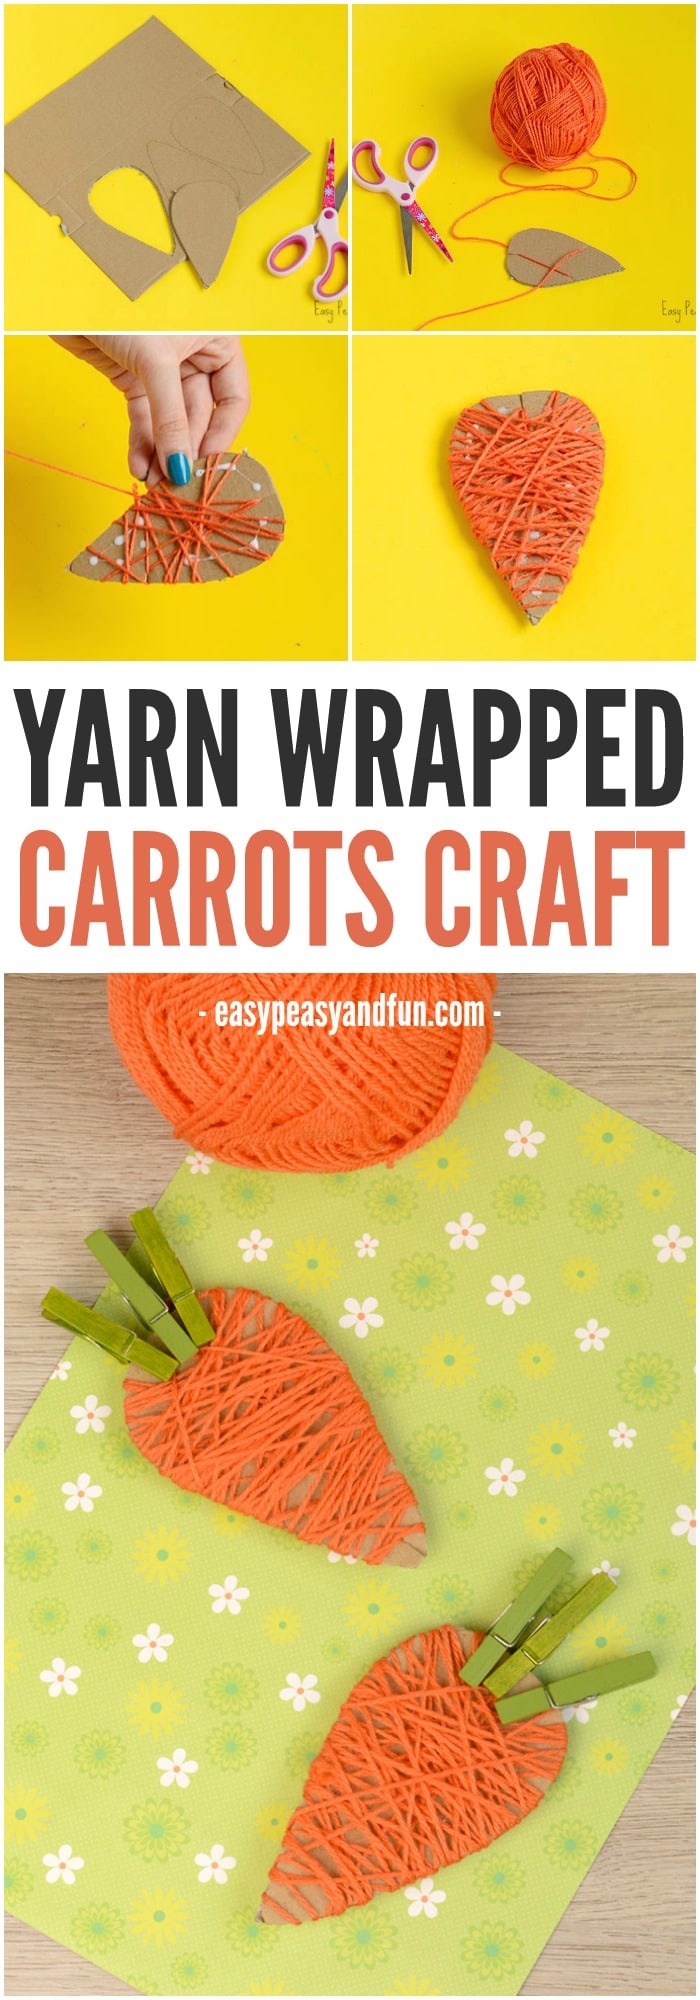 Yarn Wrapped Carrot Craft for Kids